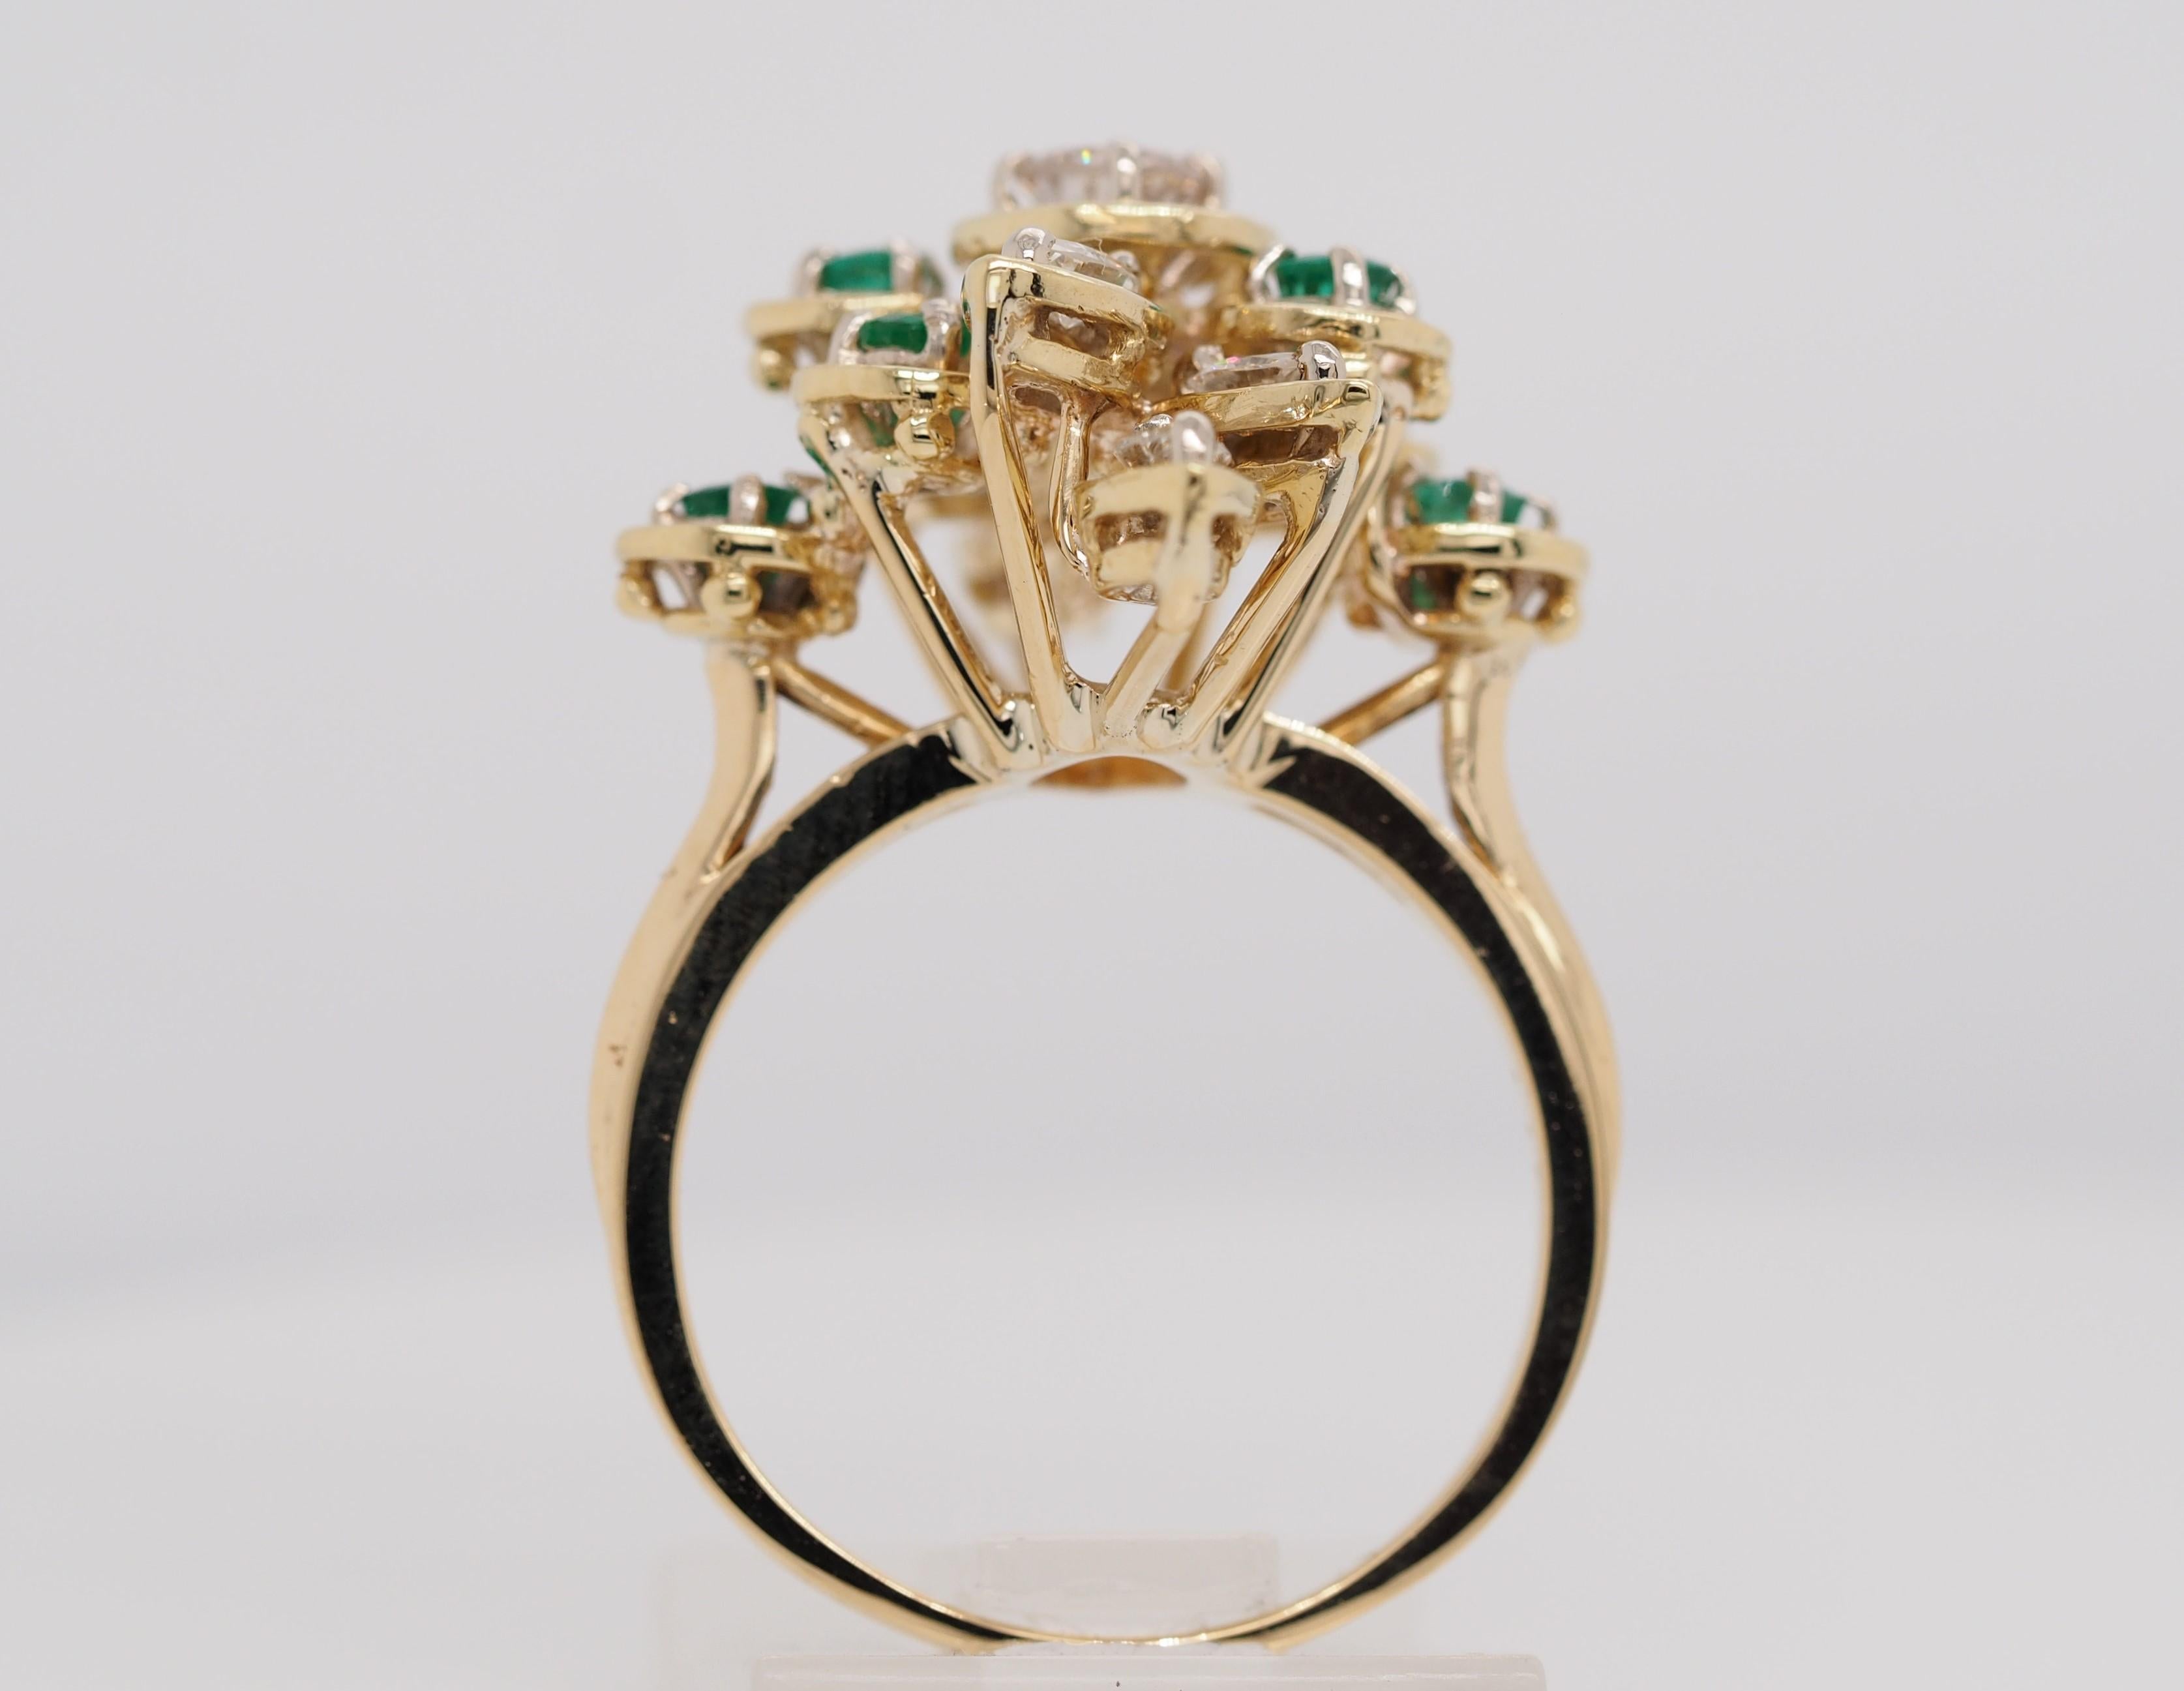 Vintage 14 Karat Yellow Gold Emerald and Diamond Cocktail Ring In Excellent Condition For Sale In Addison, TX